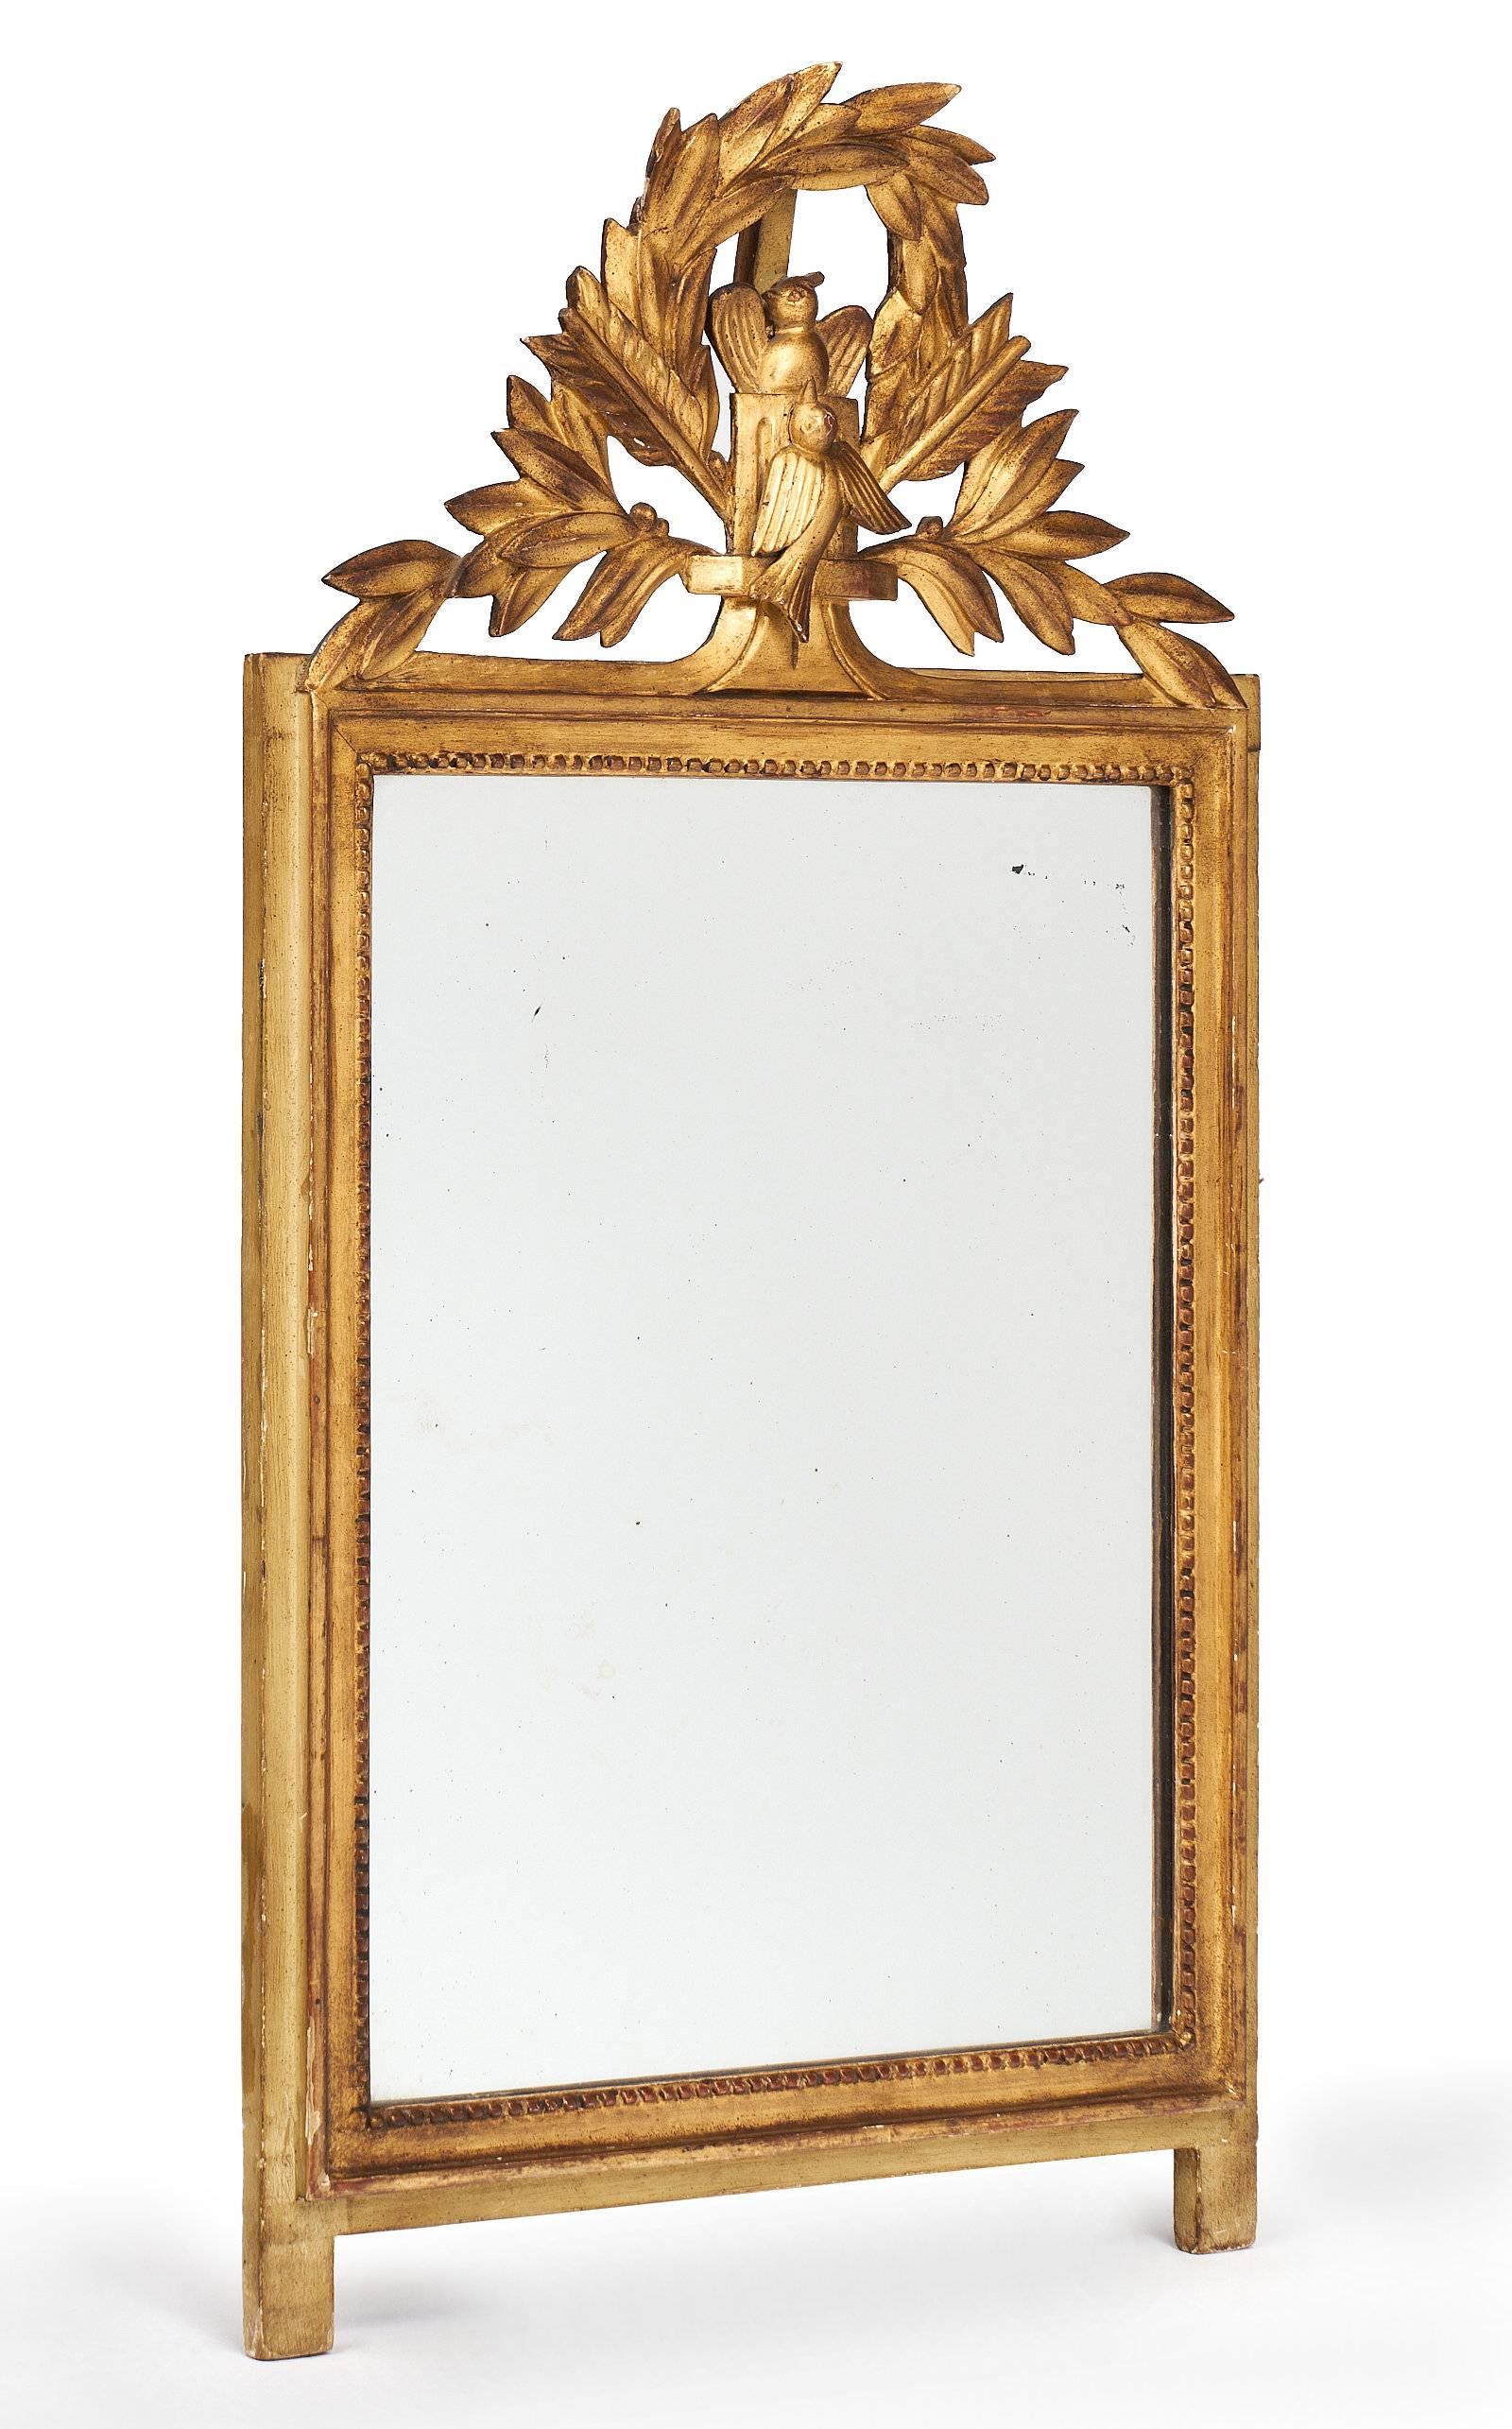 French Louis XVI style mirror with a charming 23-karat gold leaf finish. The frame is hand-carved wood composition of foliage, arrow, and bird. This decoration and style are typical of the neoclassical period. The mercury mirror is